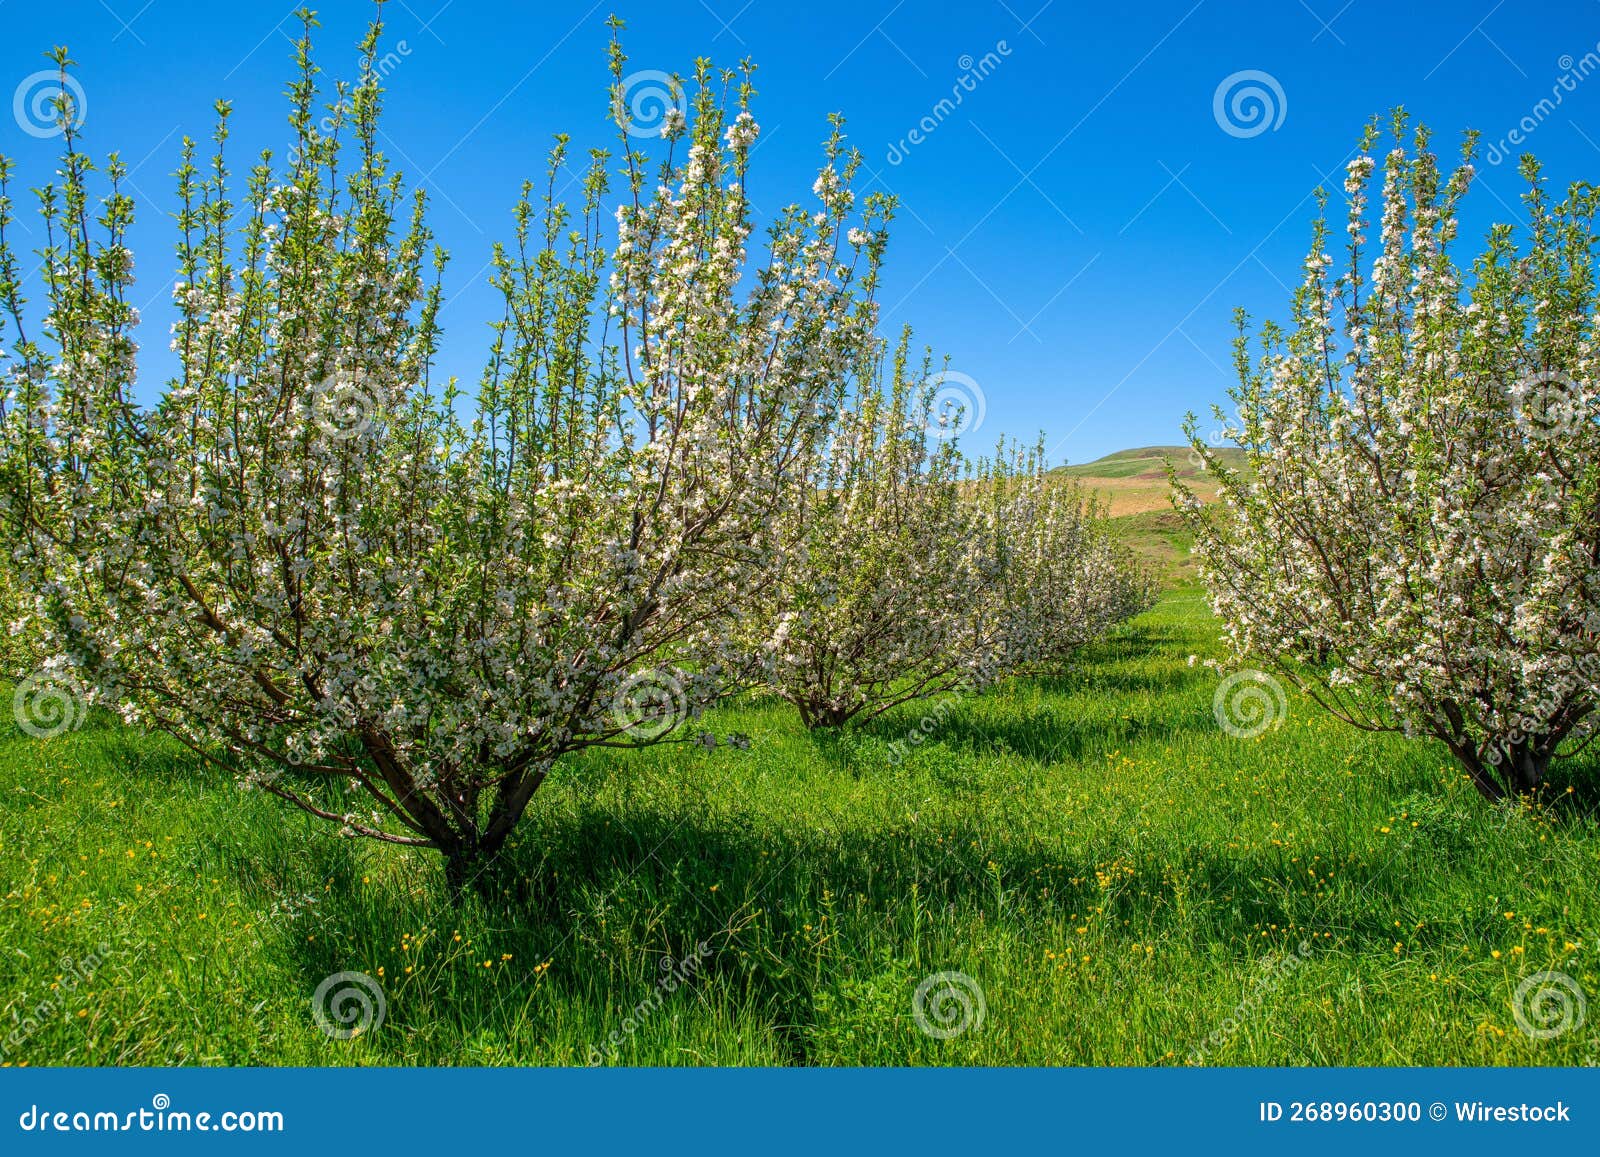 apple trees in the town of takab in west azerbaijan province, iran.